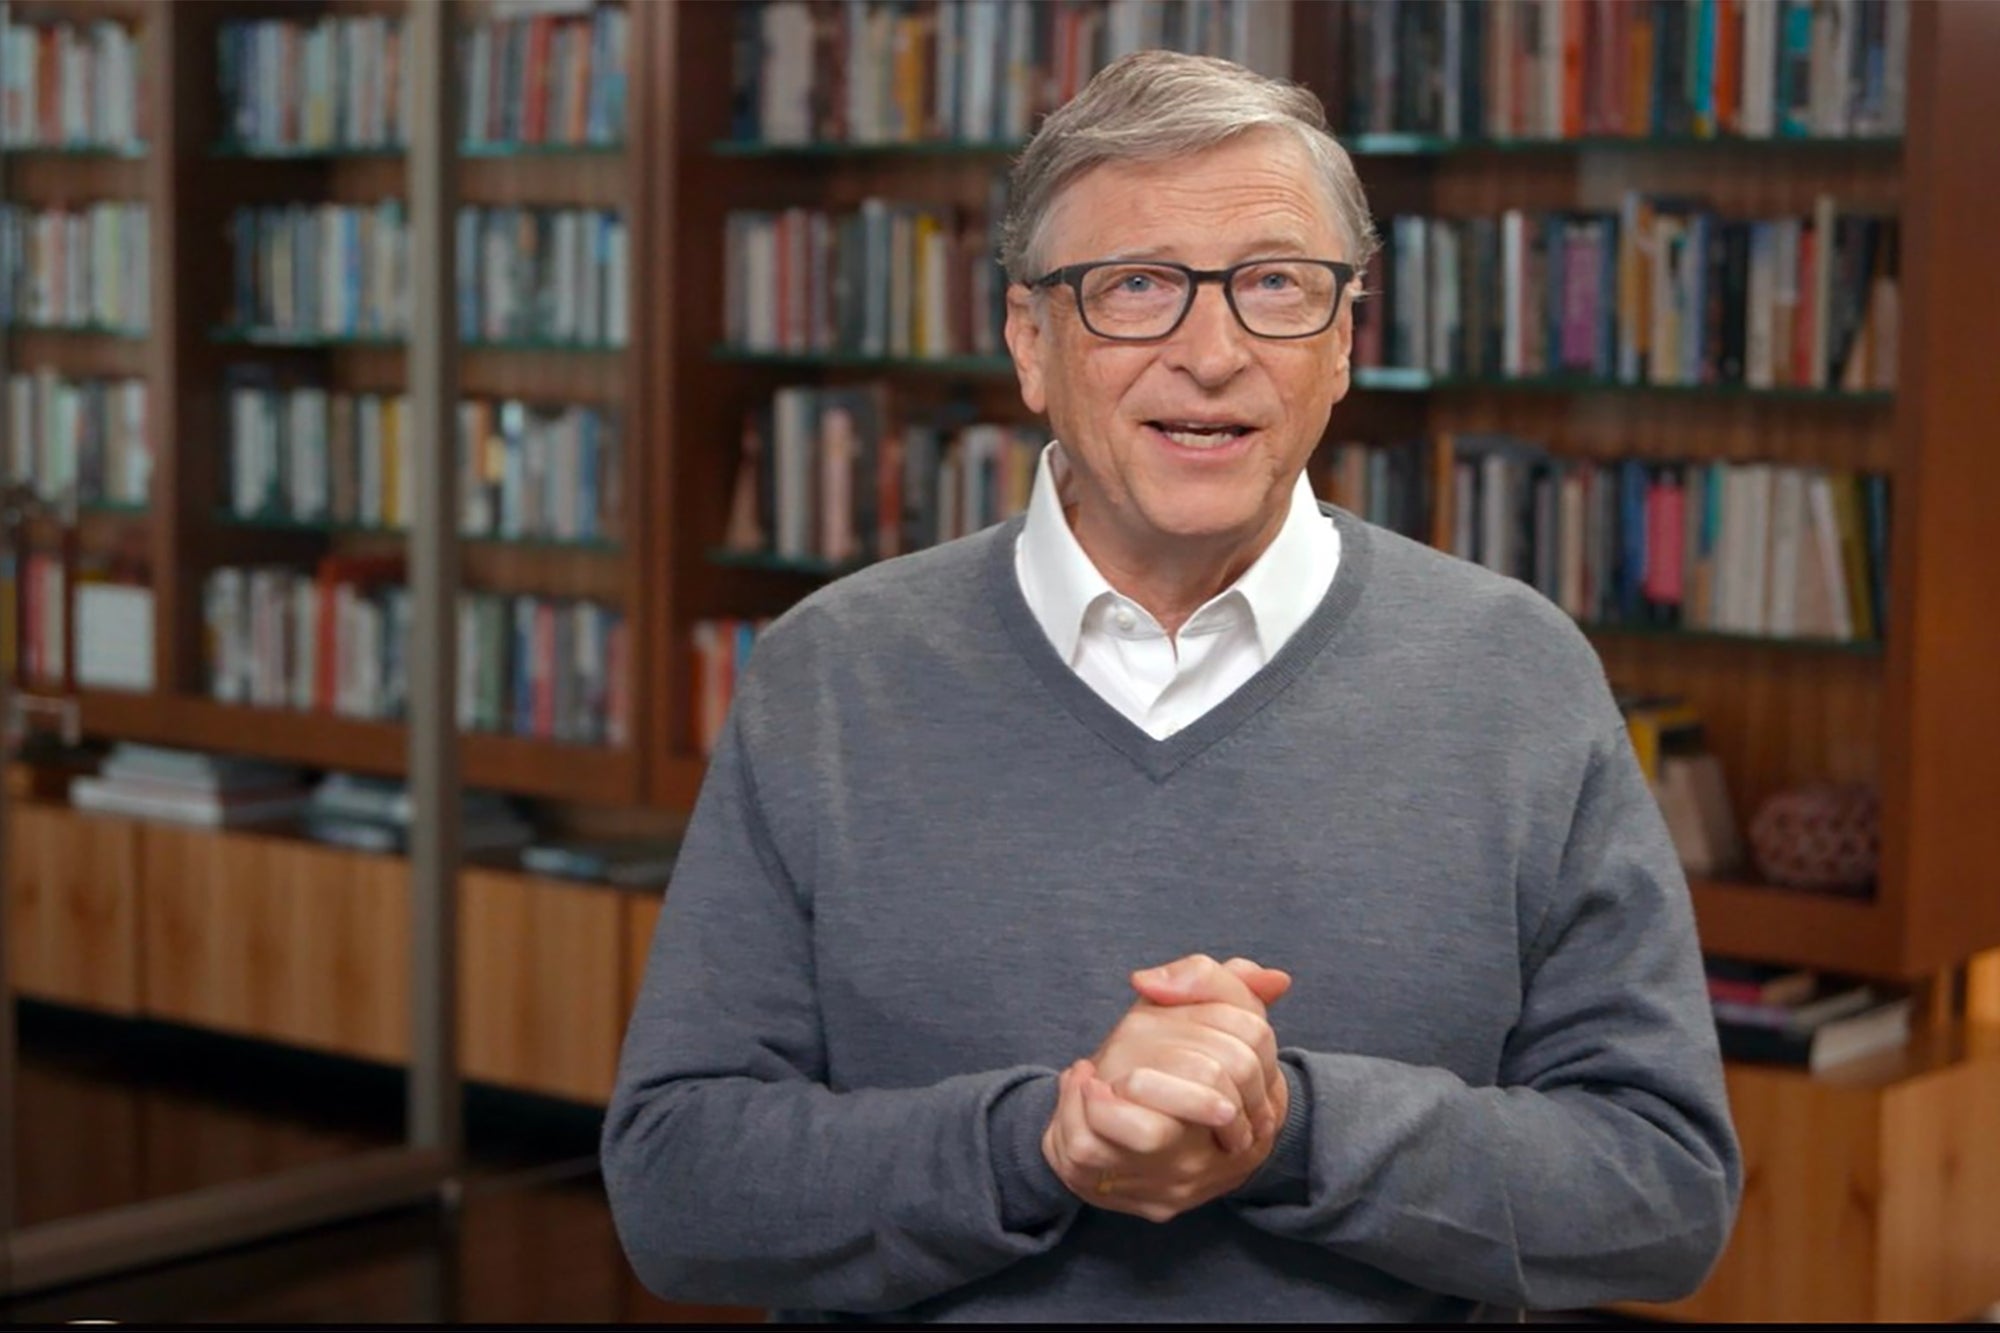 Bill Gates Blasts Crypto, NFTs as Based on ‘Greater-Fool’ Theory